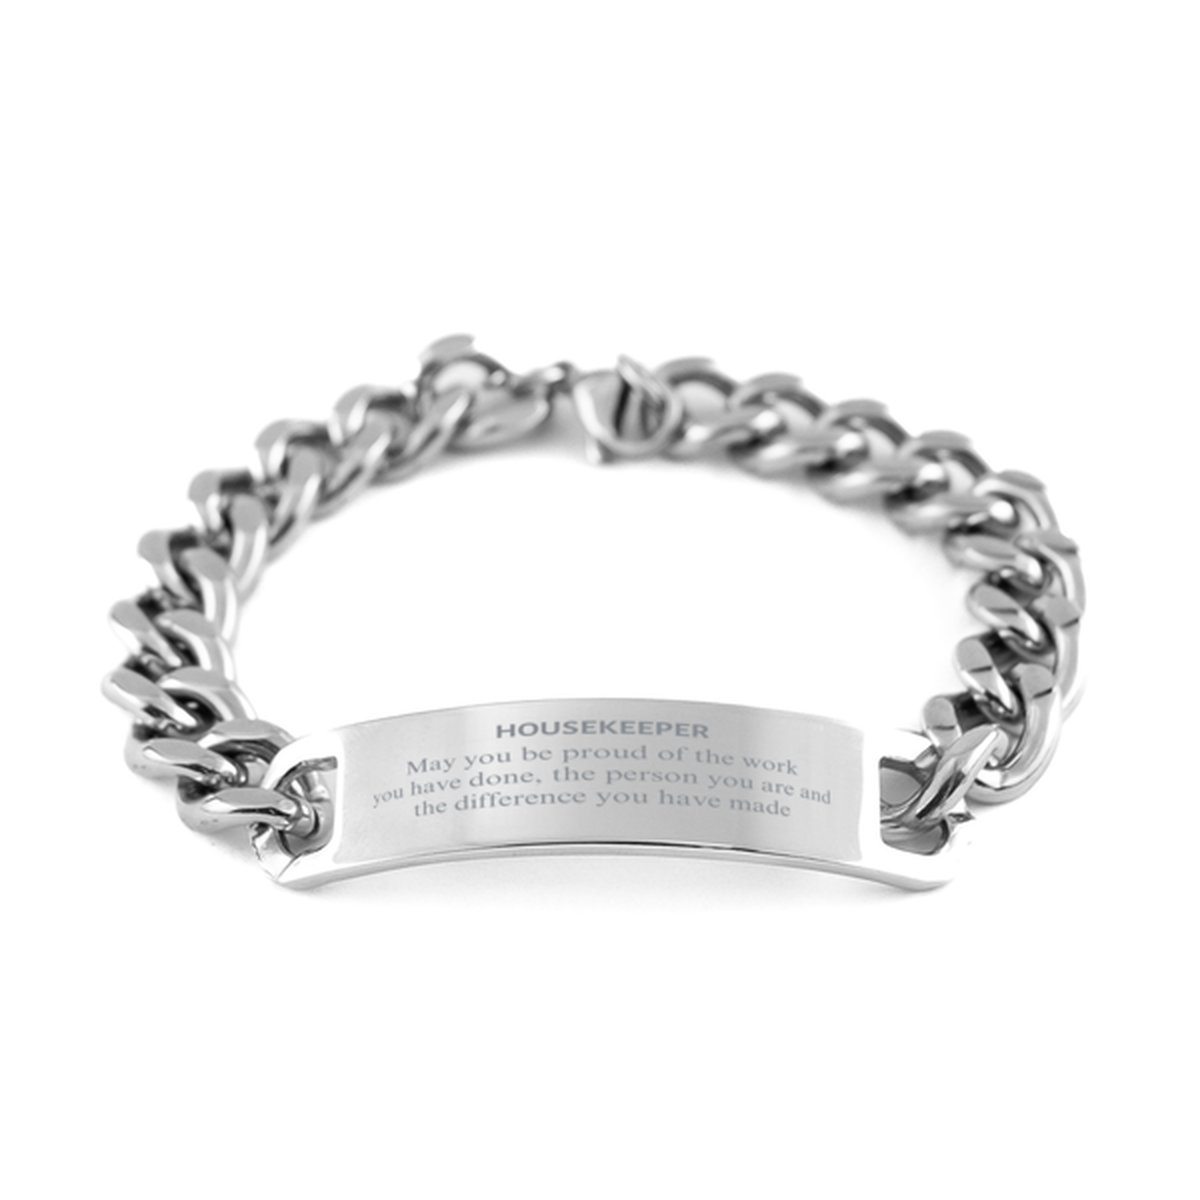 Housekeeper May you be proud of the work you have done, Retirement Housekeeper Cuban Chain Stainless Steel Bracelet for Colleague Appreciation Gifts Amazing for Housekeeper